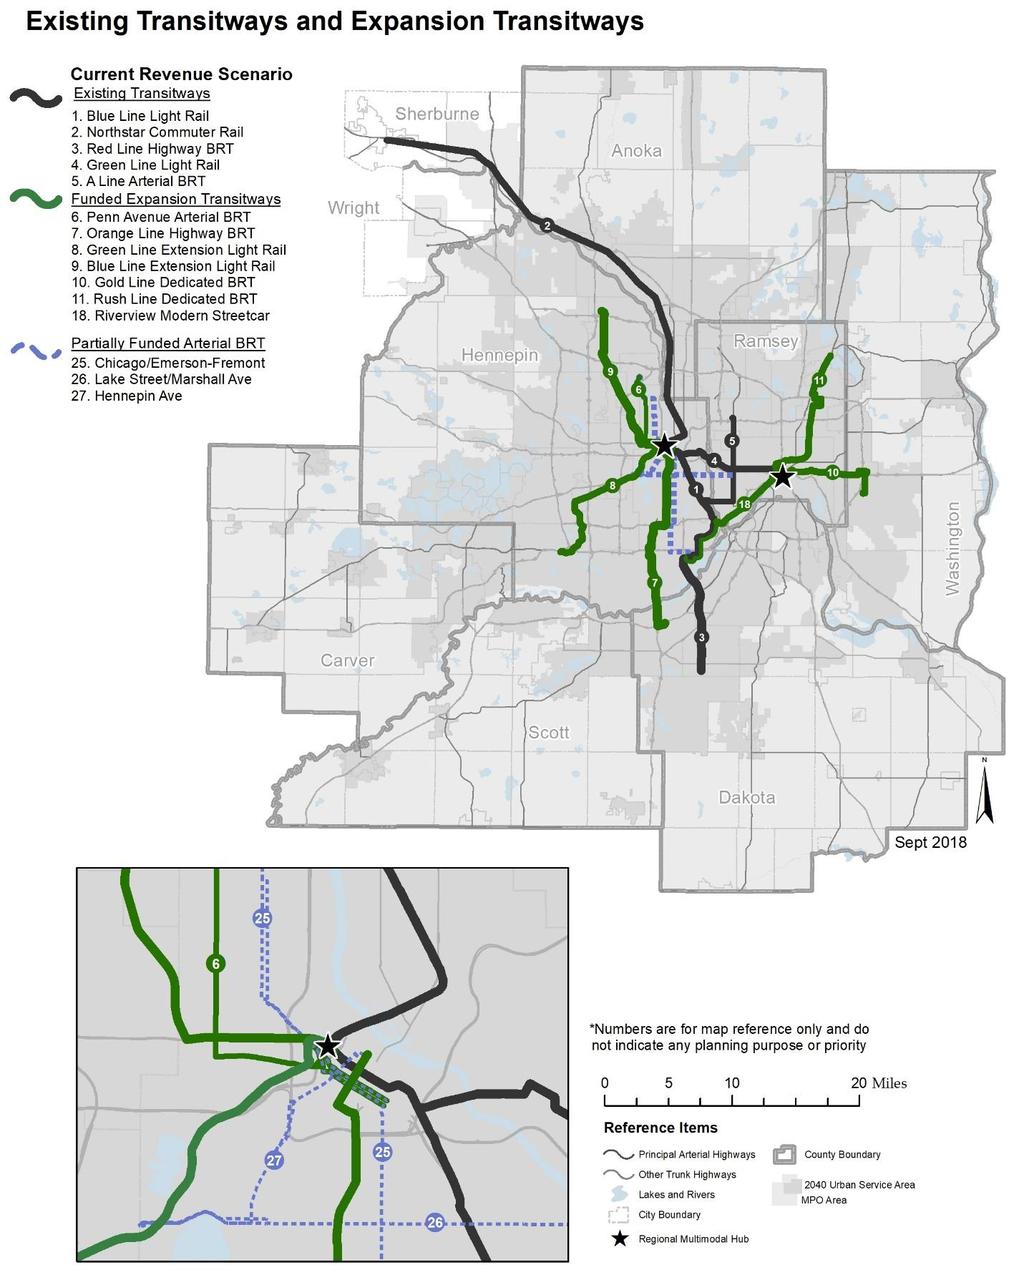 Revised Figure 6-8: Map of Existing Transitways and Current Revenue Scenario Expansion Transitways